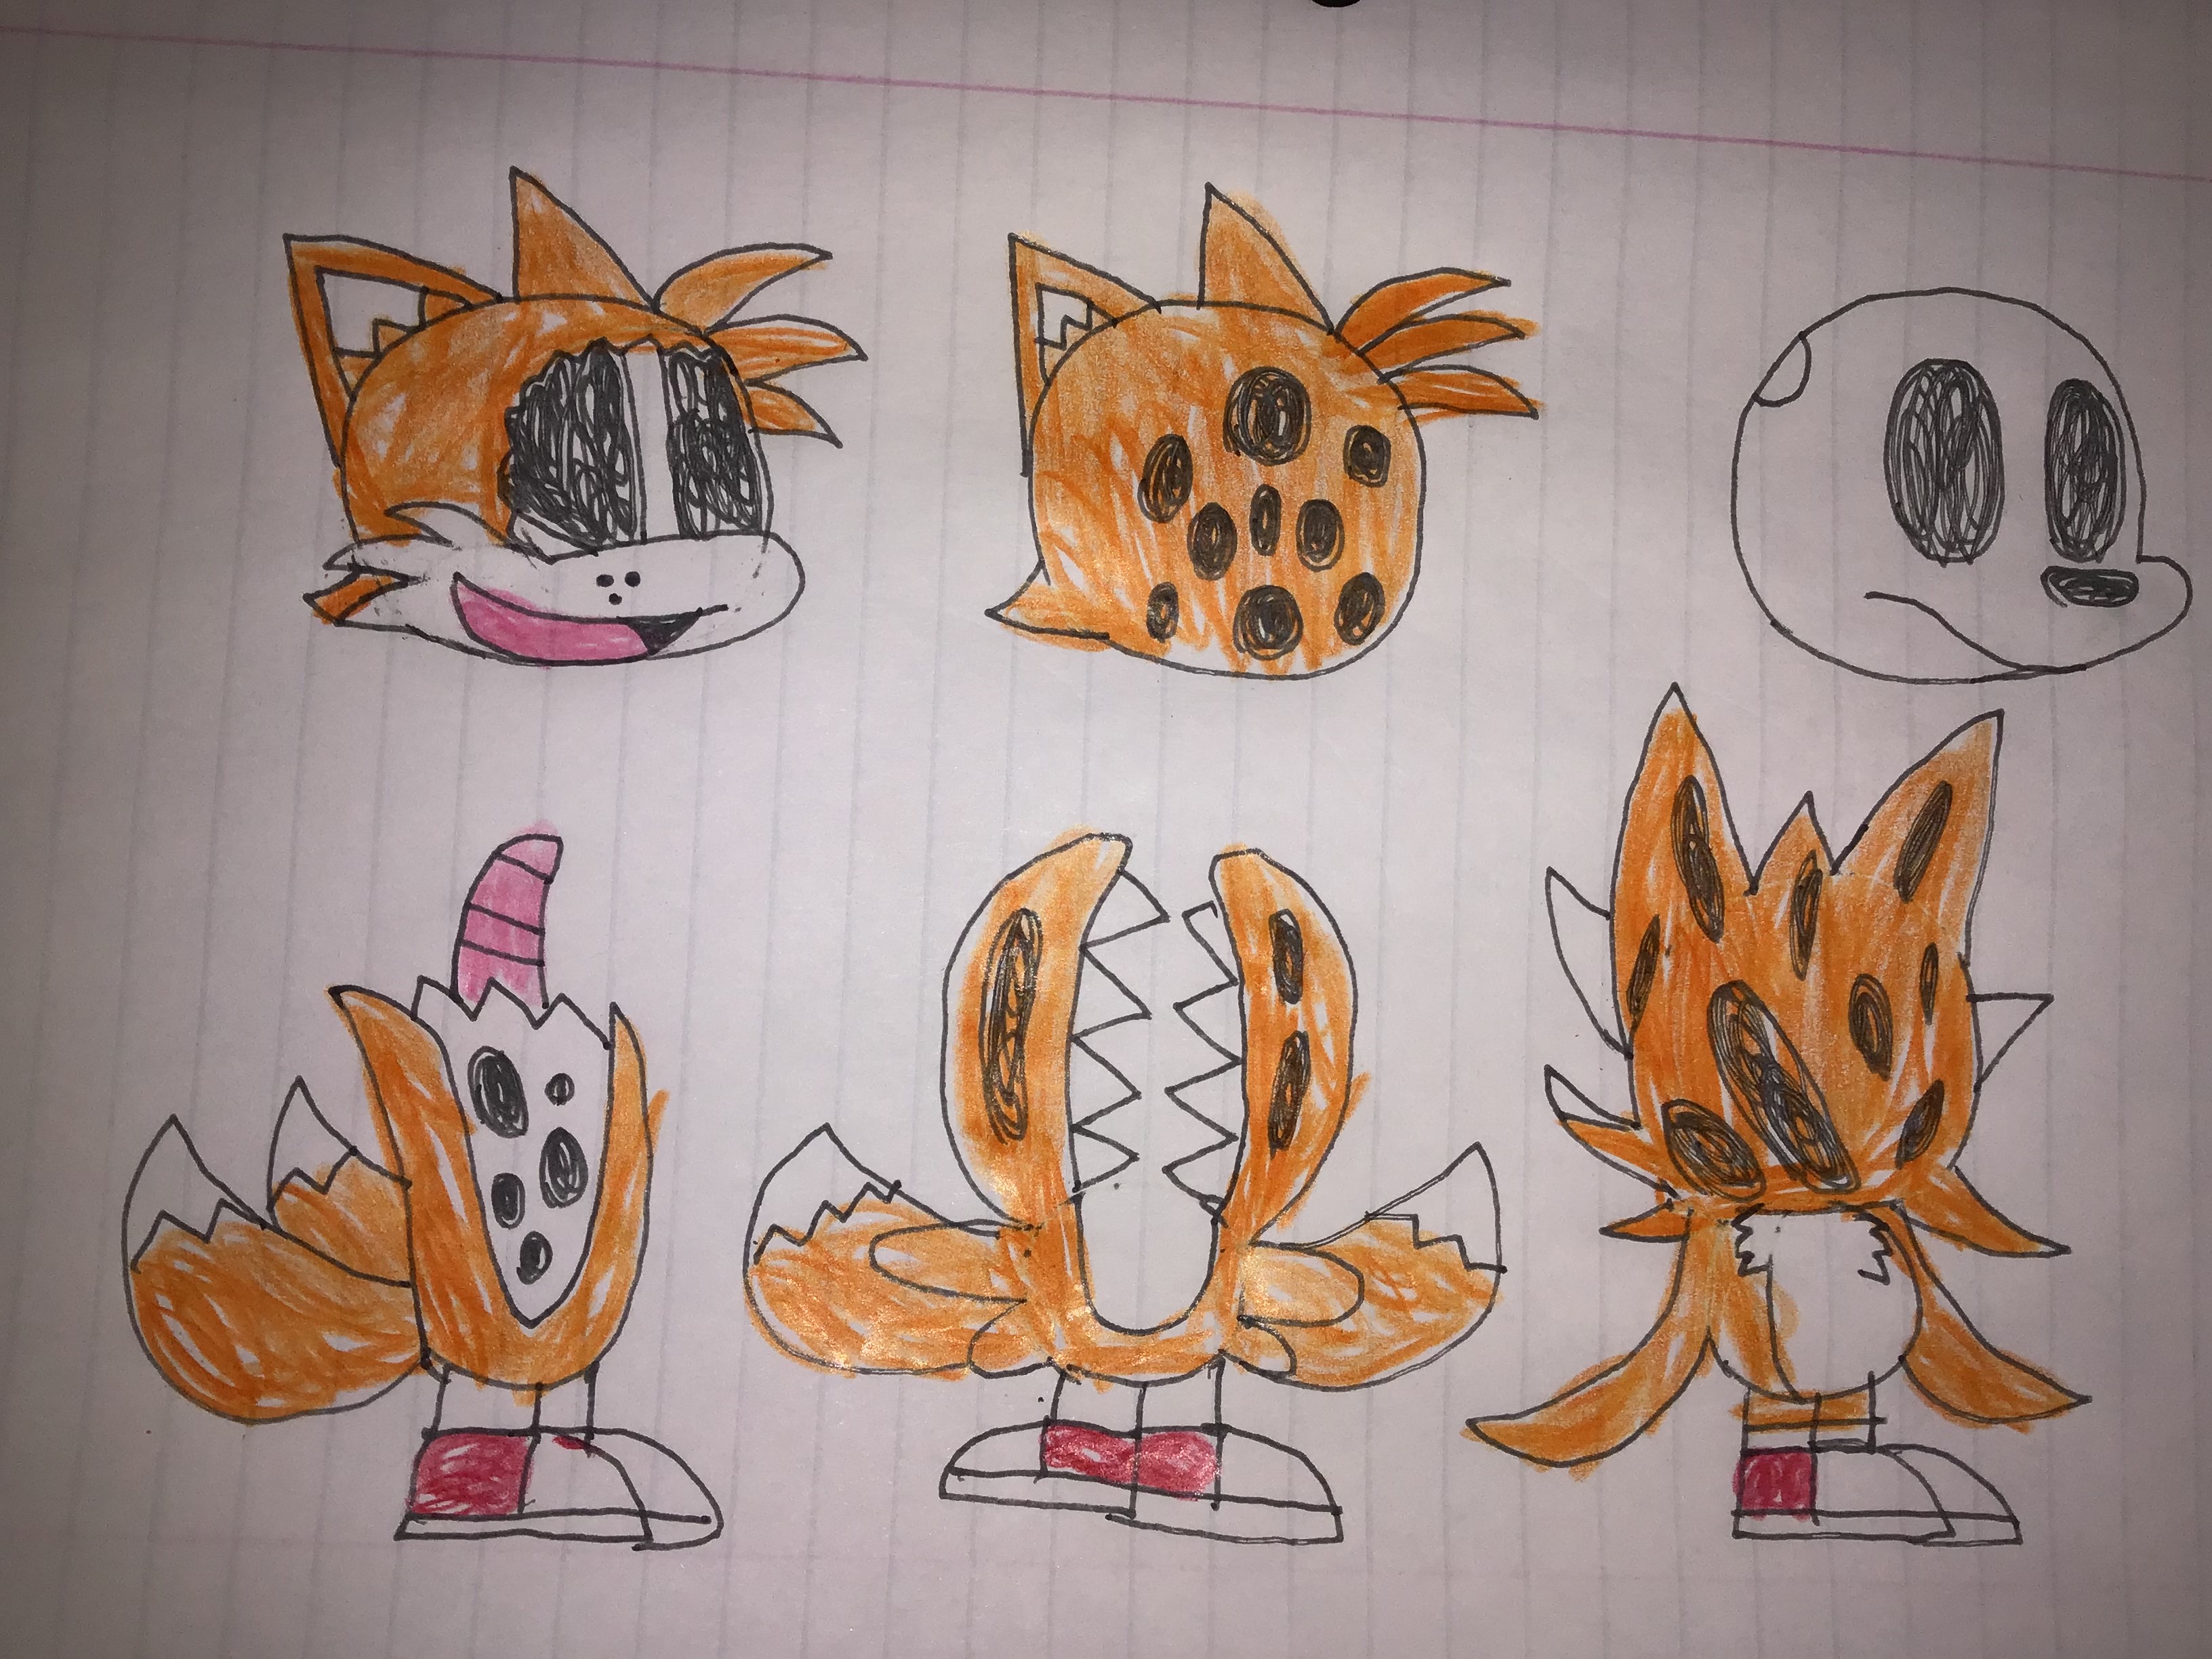 How To Draw Tails.EXE  Sonic the Hedgehog 